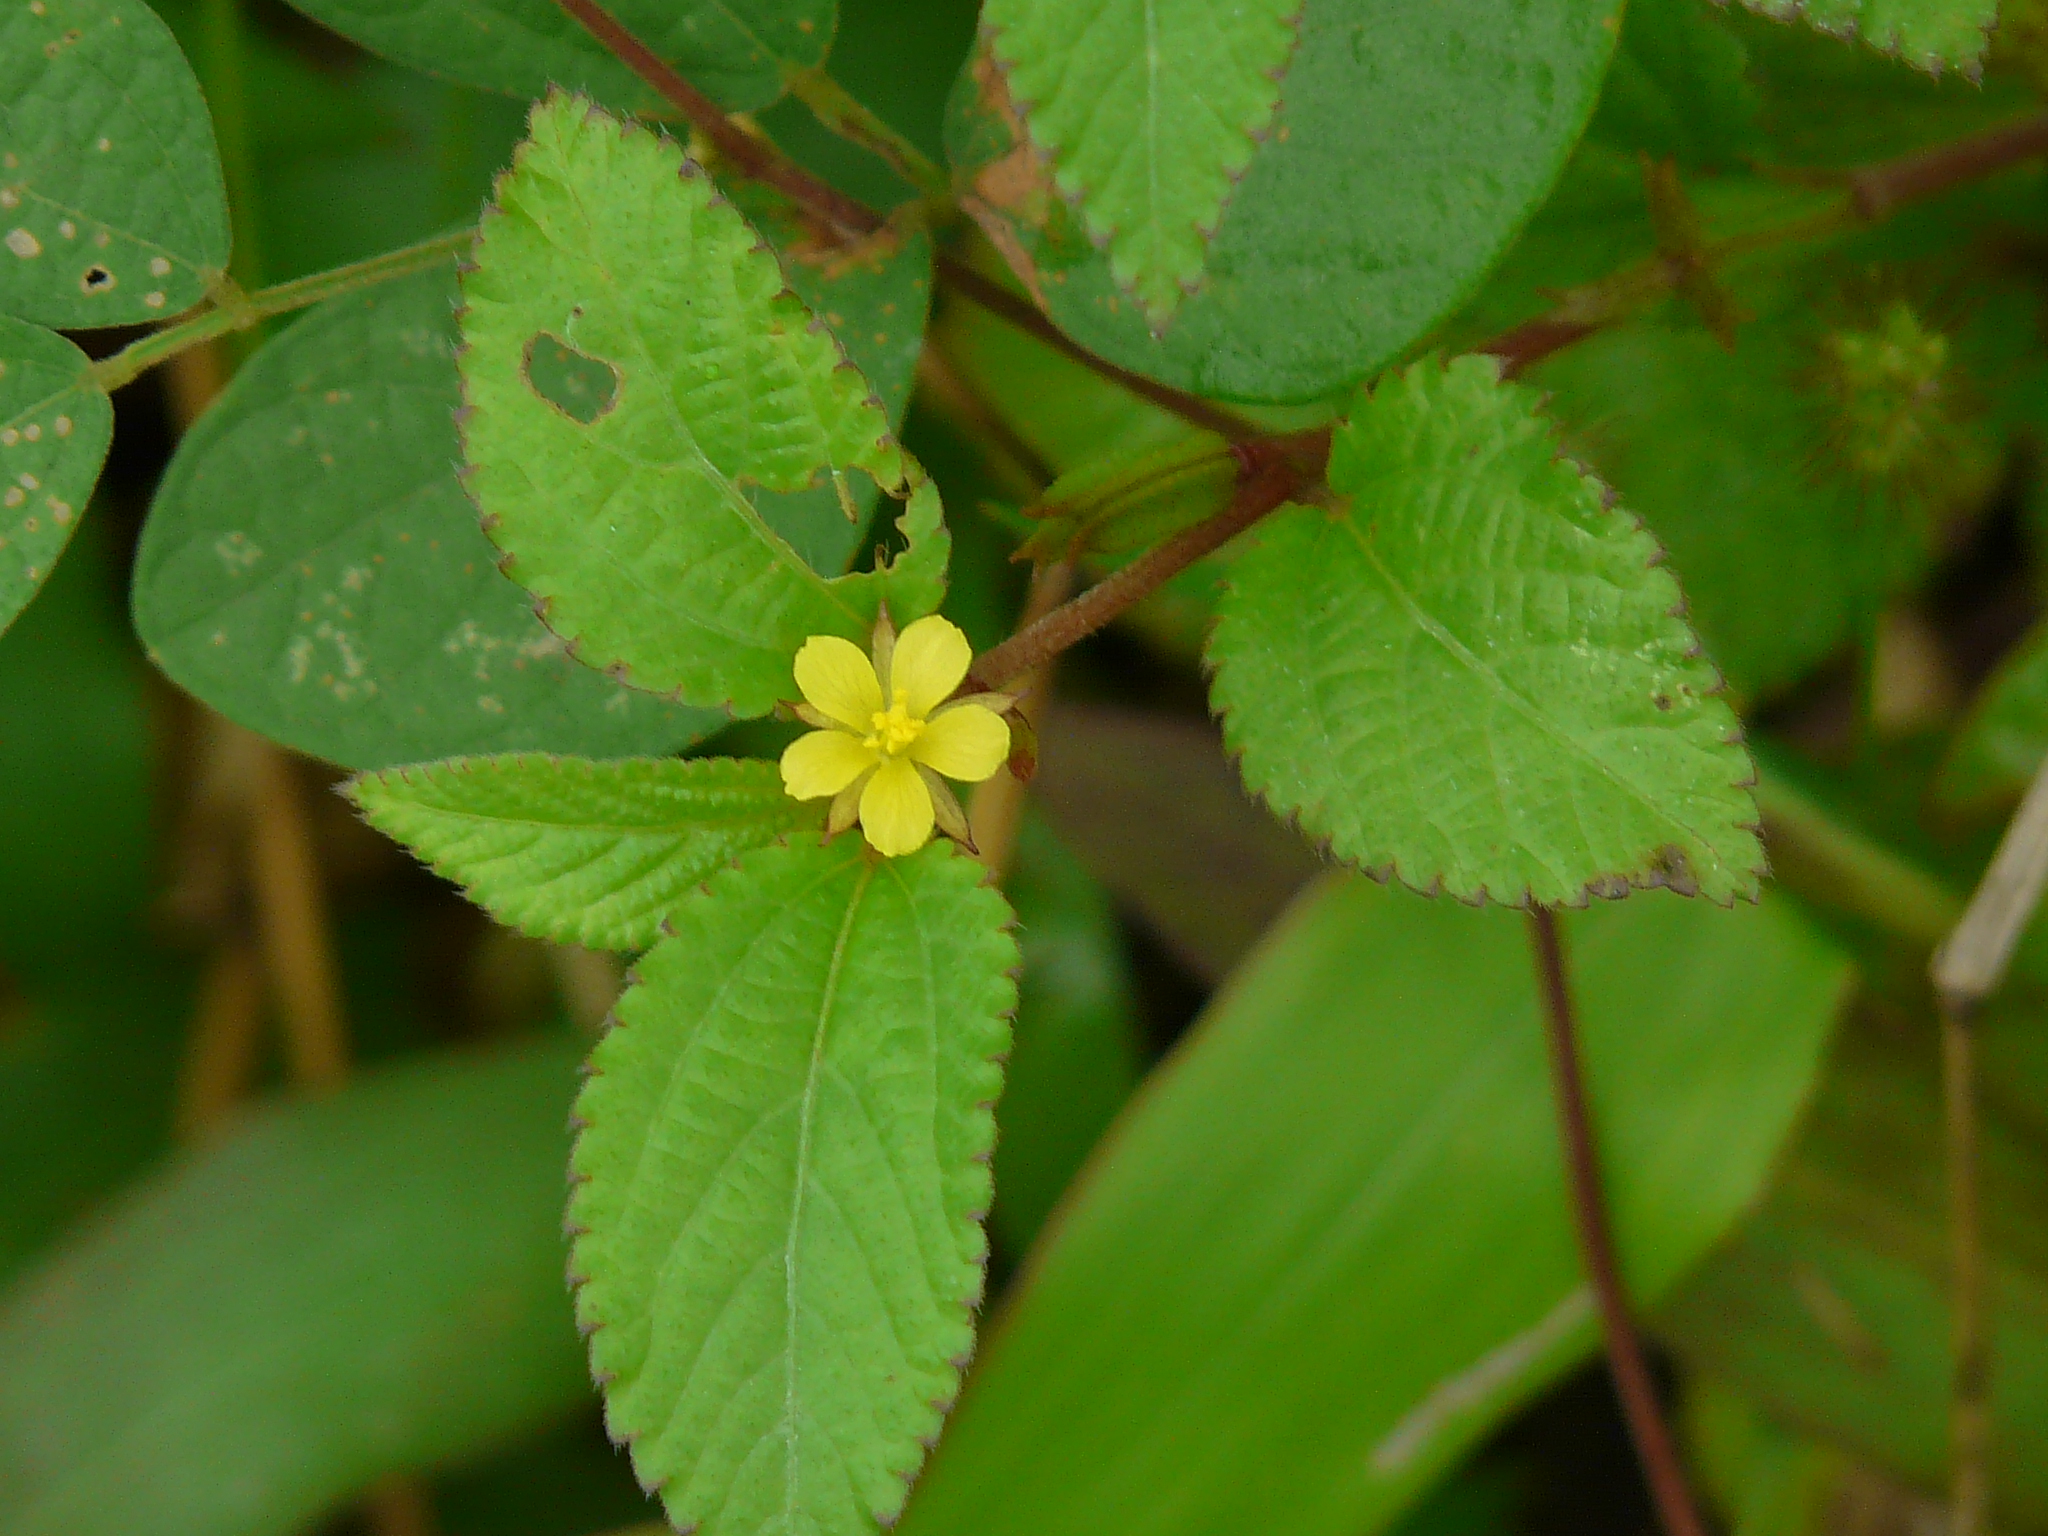 Close up of a yellow flower and serrated leaves with some herbivore damage